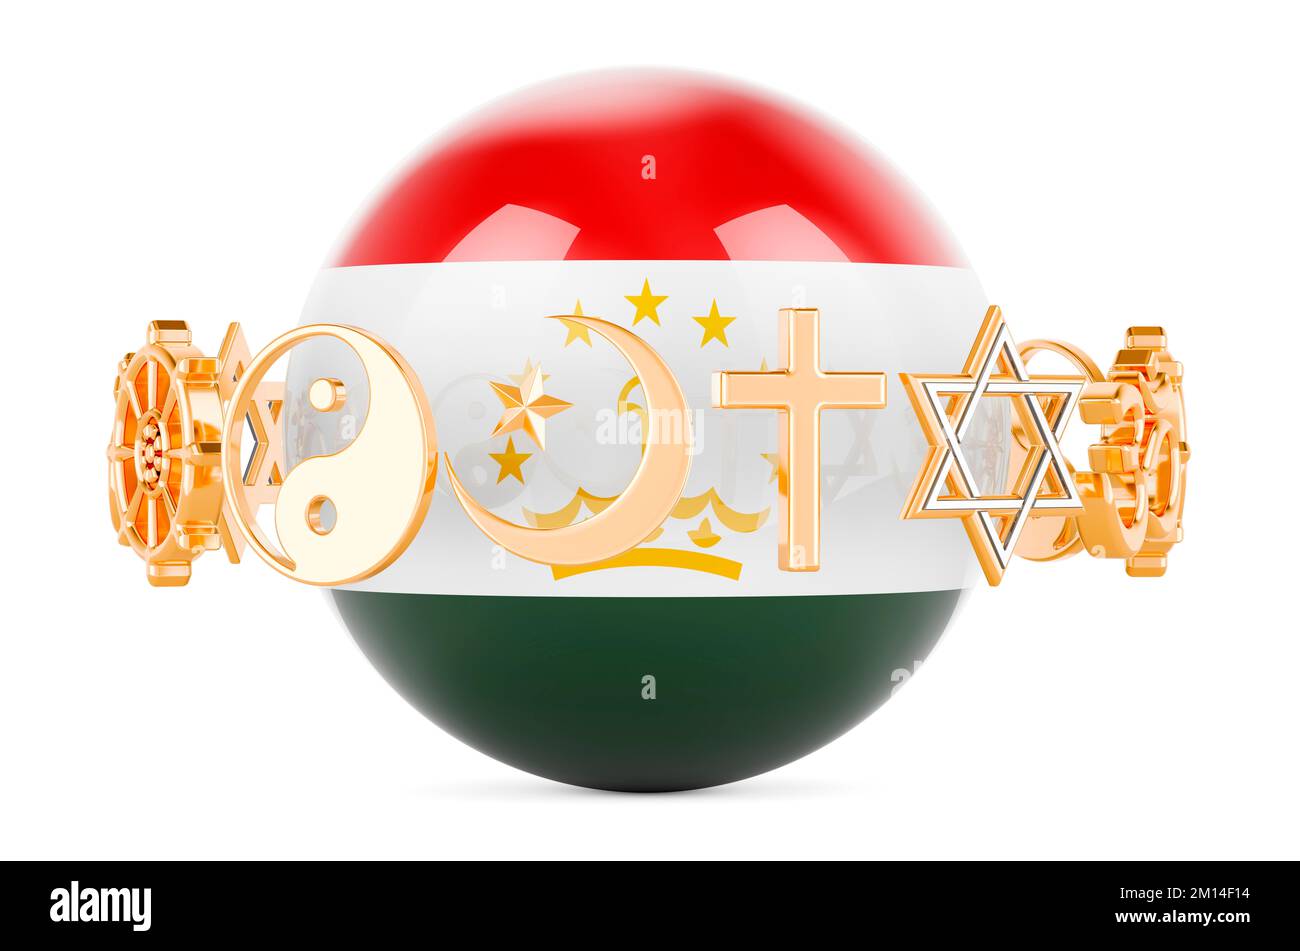 Tajik flag painted on sphere with religions symbols around, 3D rendering isolated on white background Stock Photo